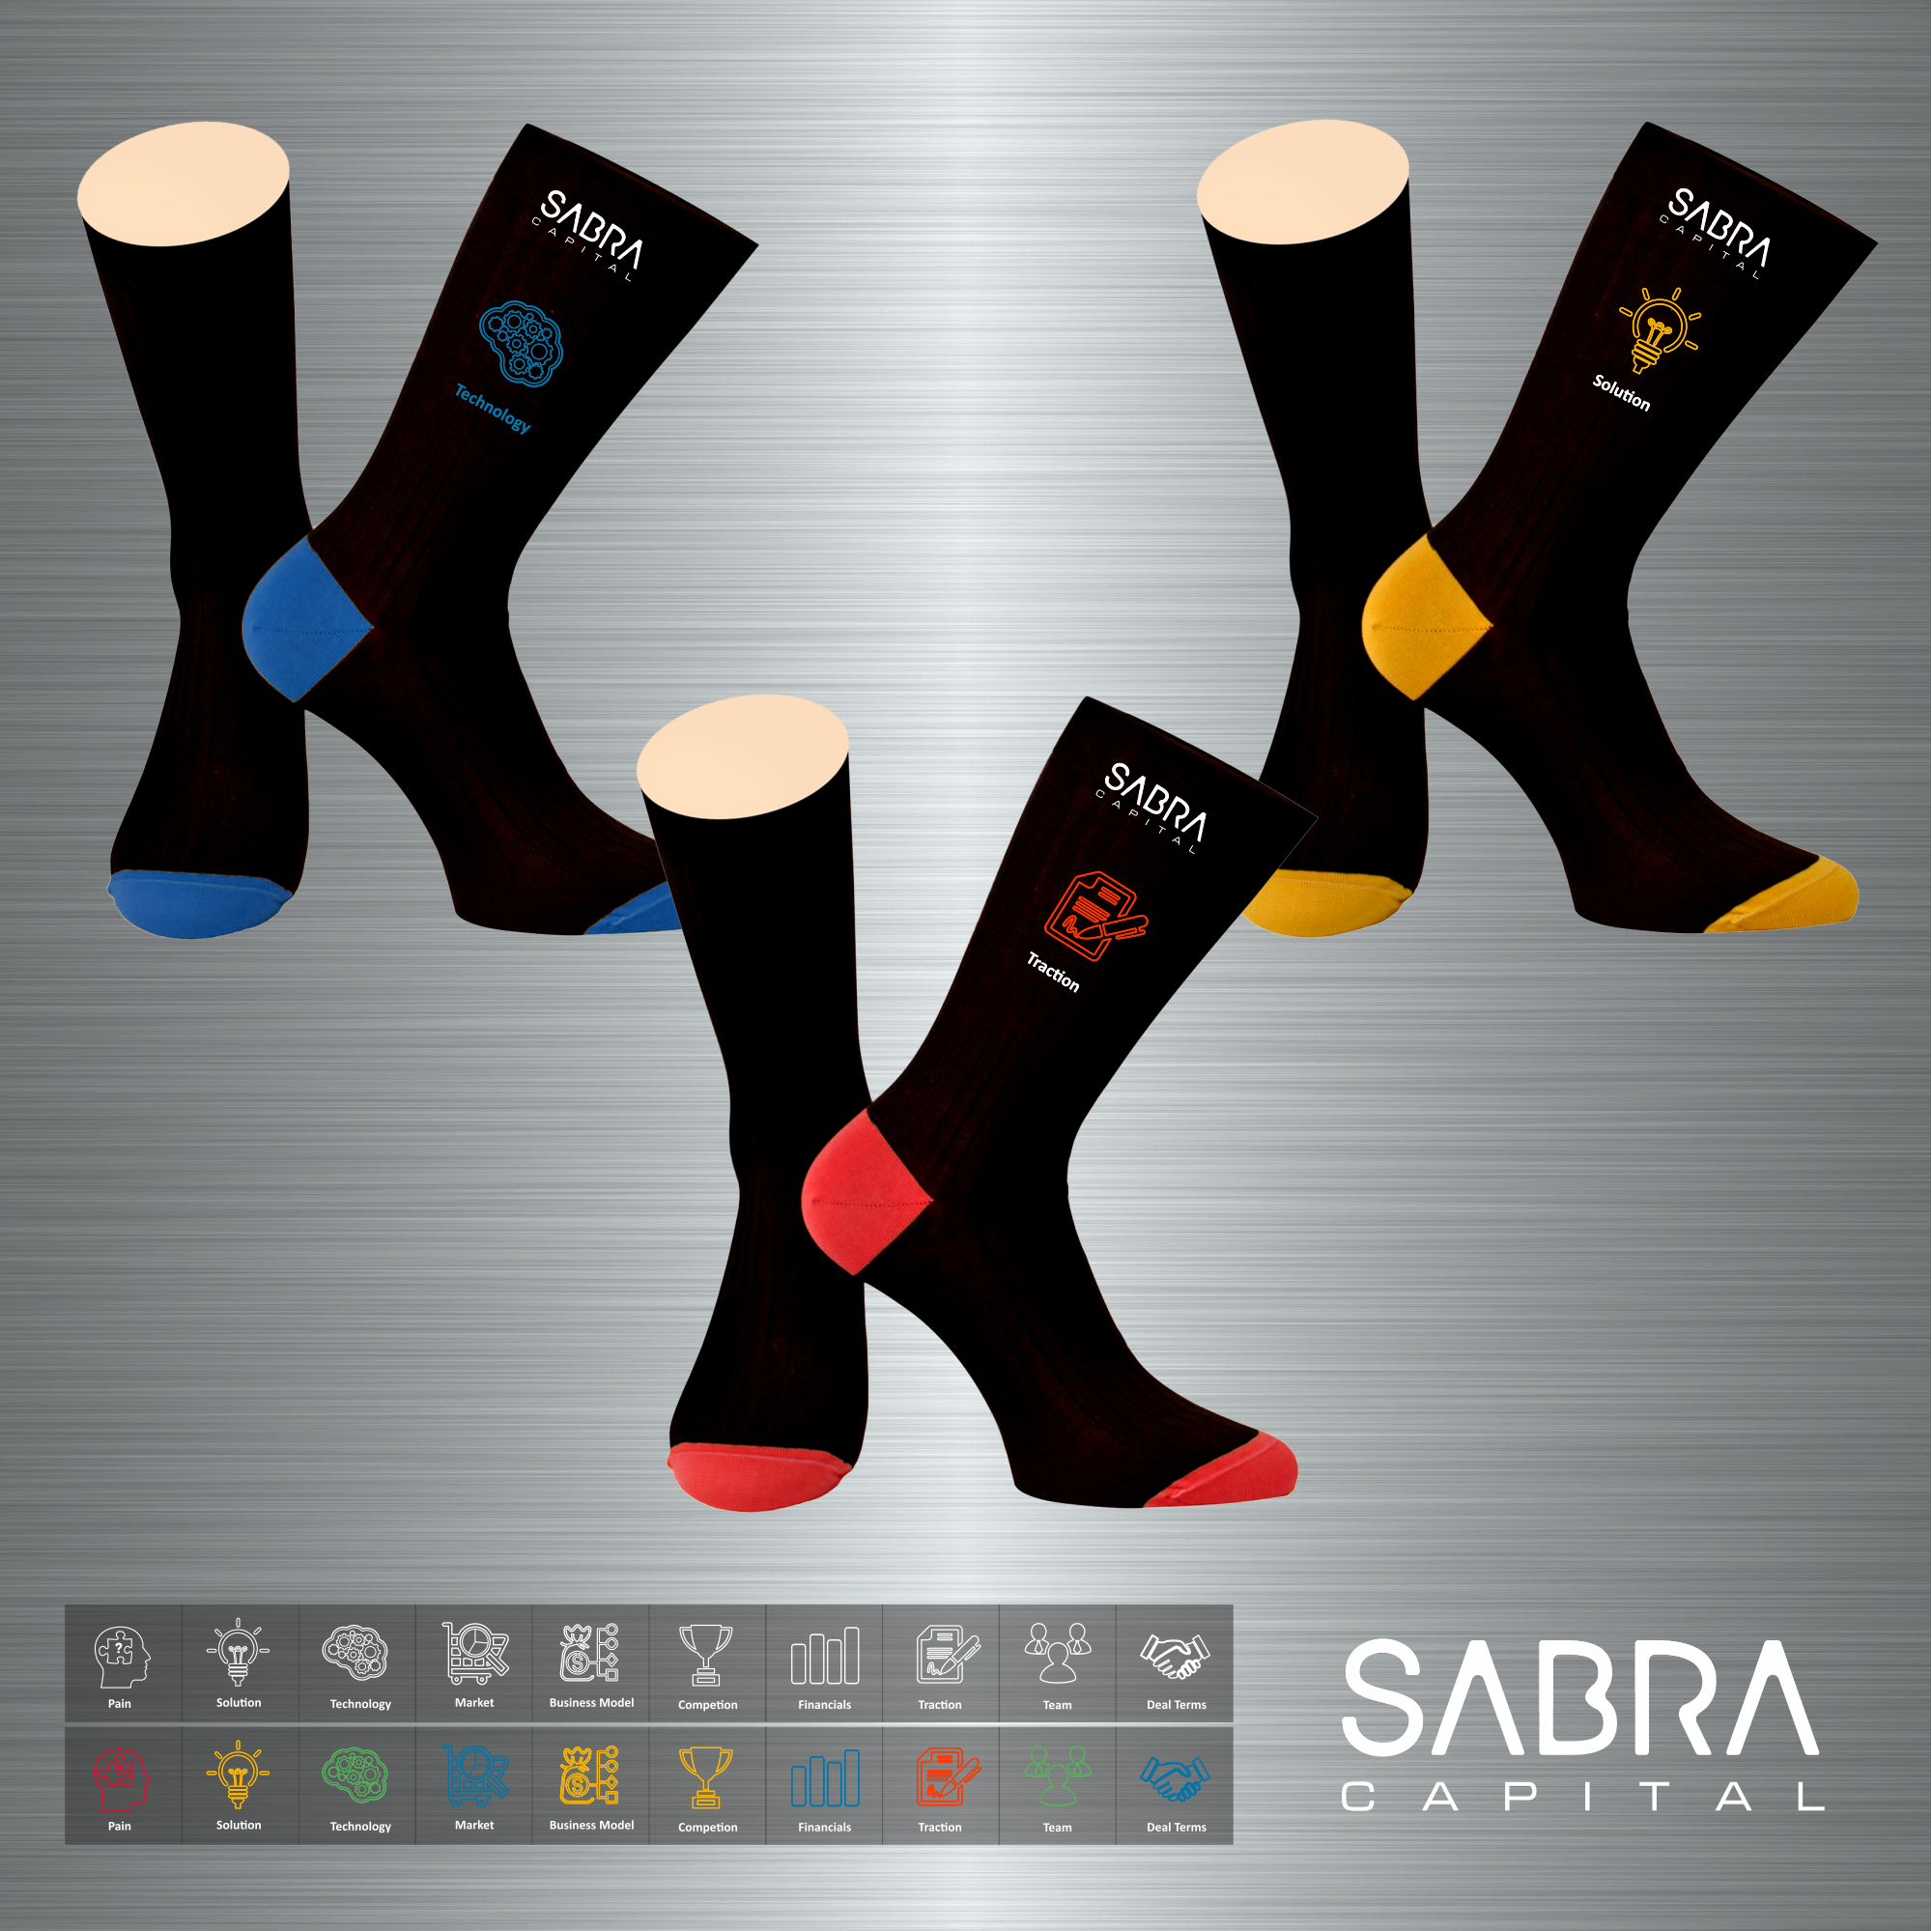 Interview Socks: make sure the whole world knows what you care the most about a startup